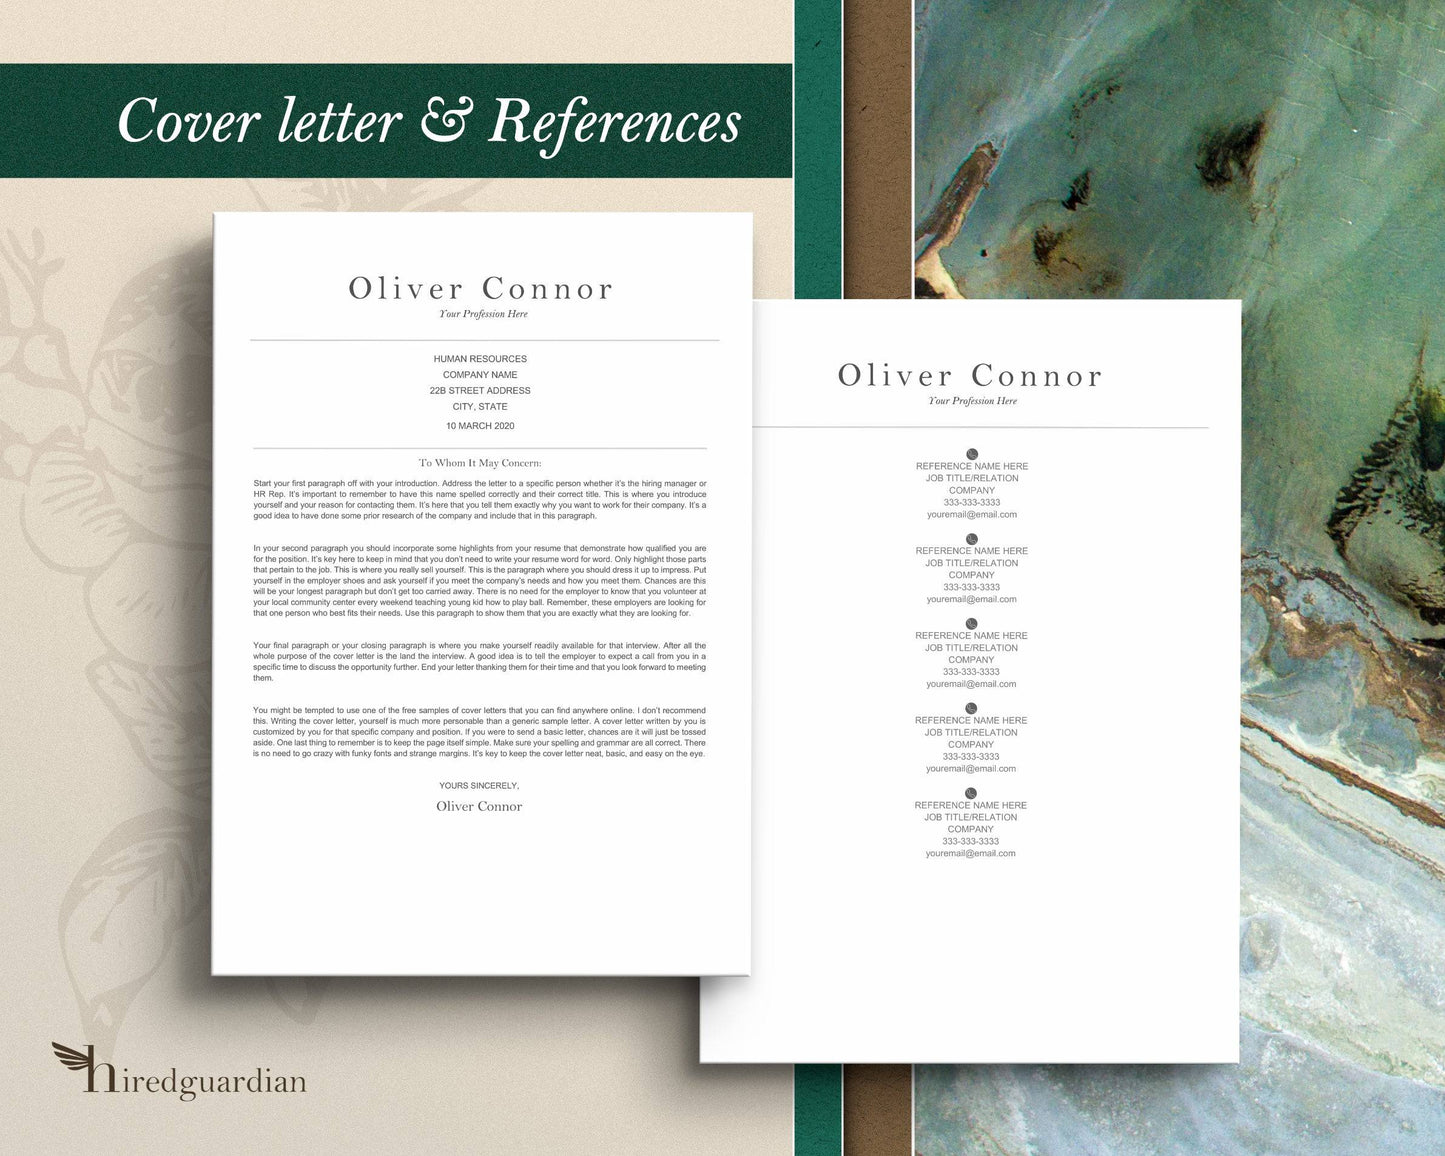 Minimalist Resume Template "Oliver" - Google docs, Word and Pages Resume Files - Hired Guardian